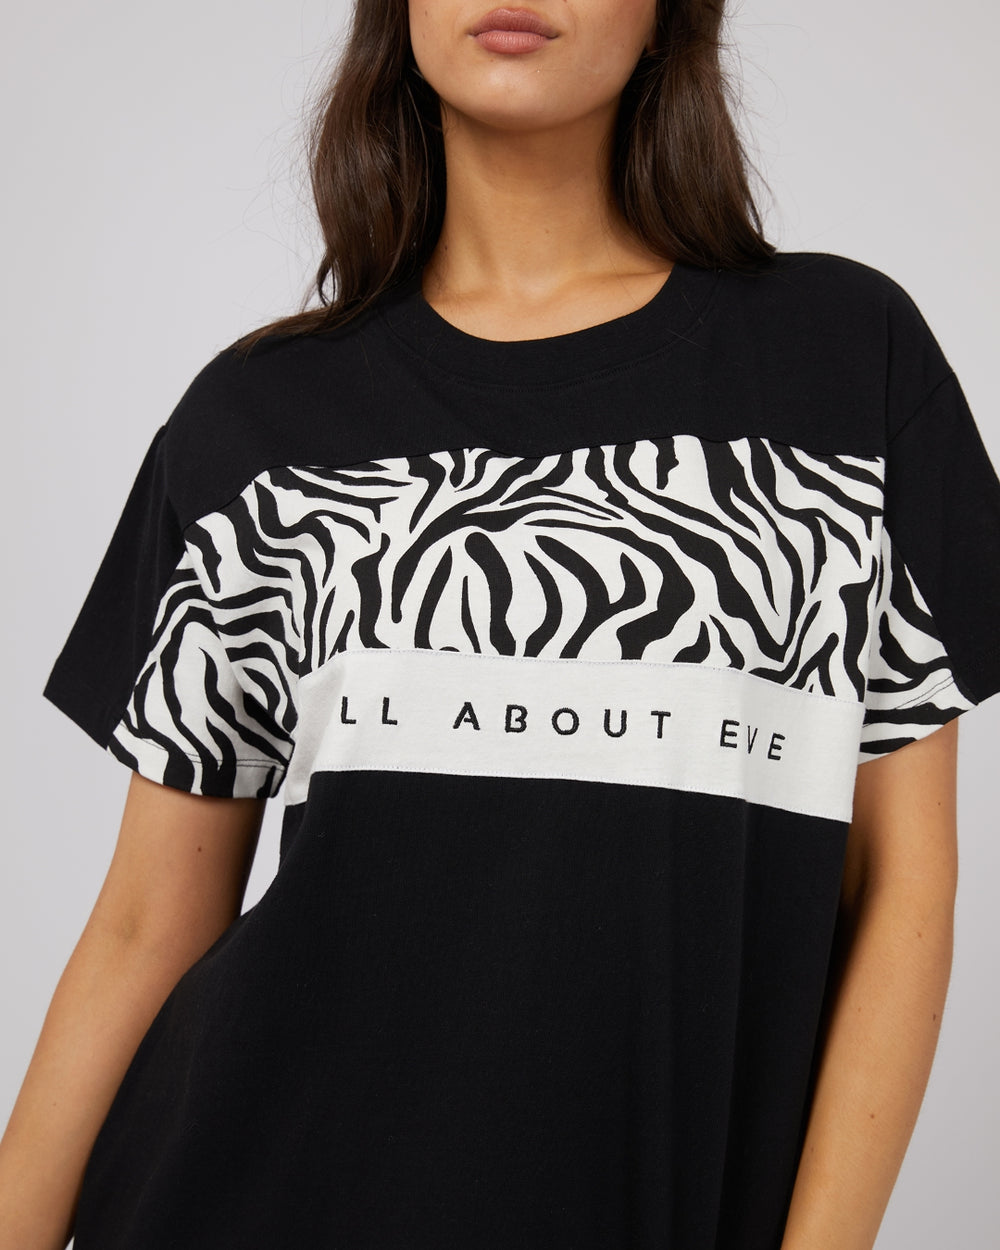 The Parker Panelled Tee from All About Eve